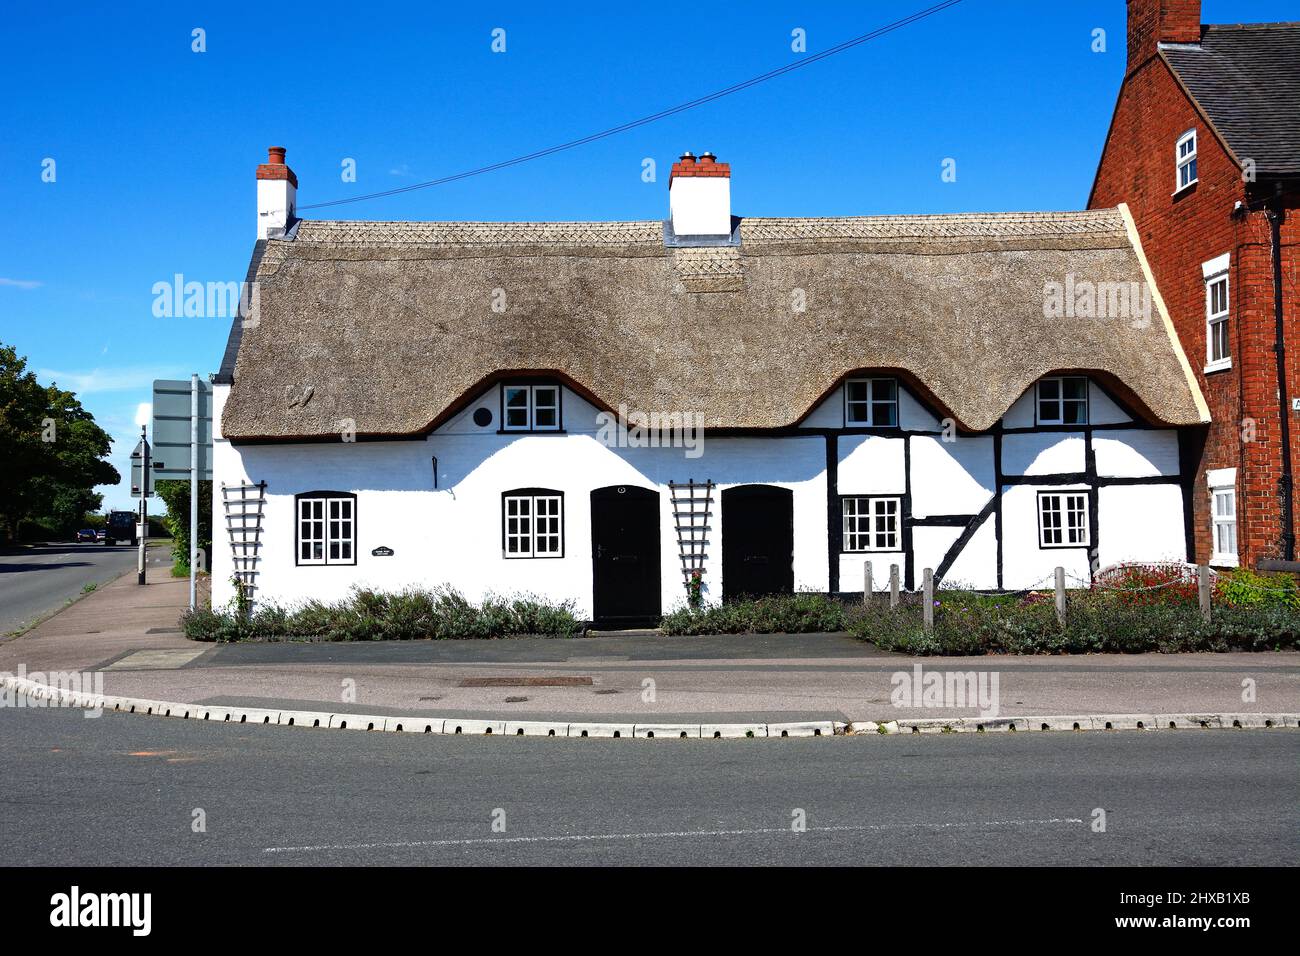 Pretty traditional English whitewashed thatched cottage in the village centre, Kings Bromley, Staffordshire, England, UK, Europe. Stock Photo